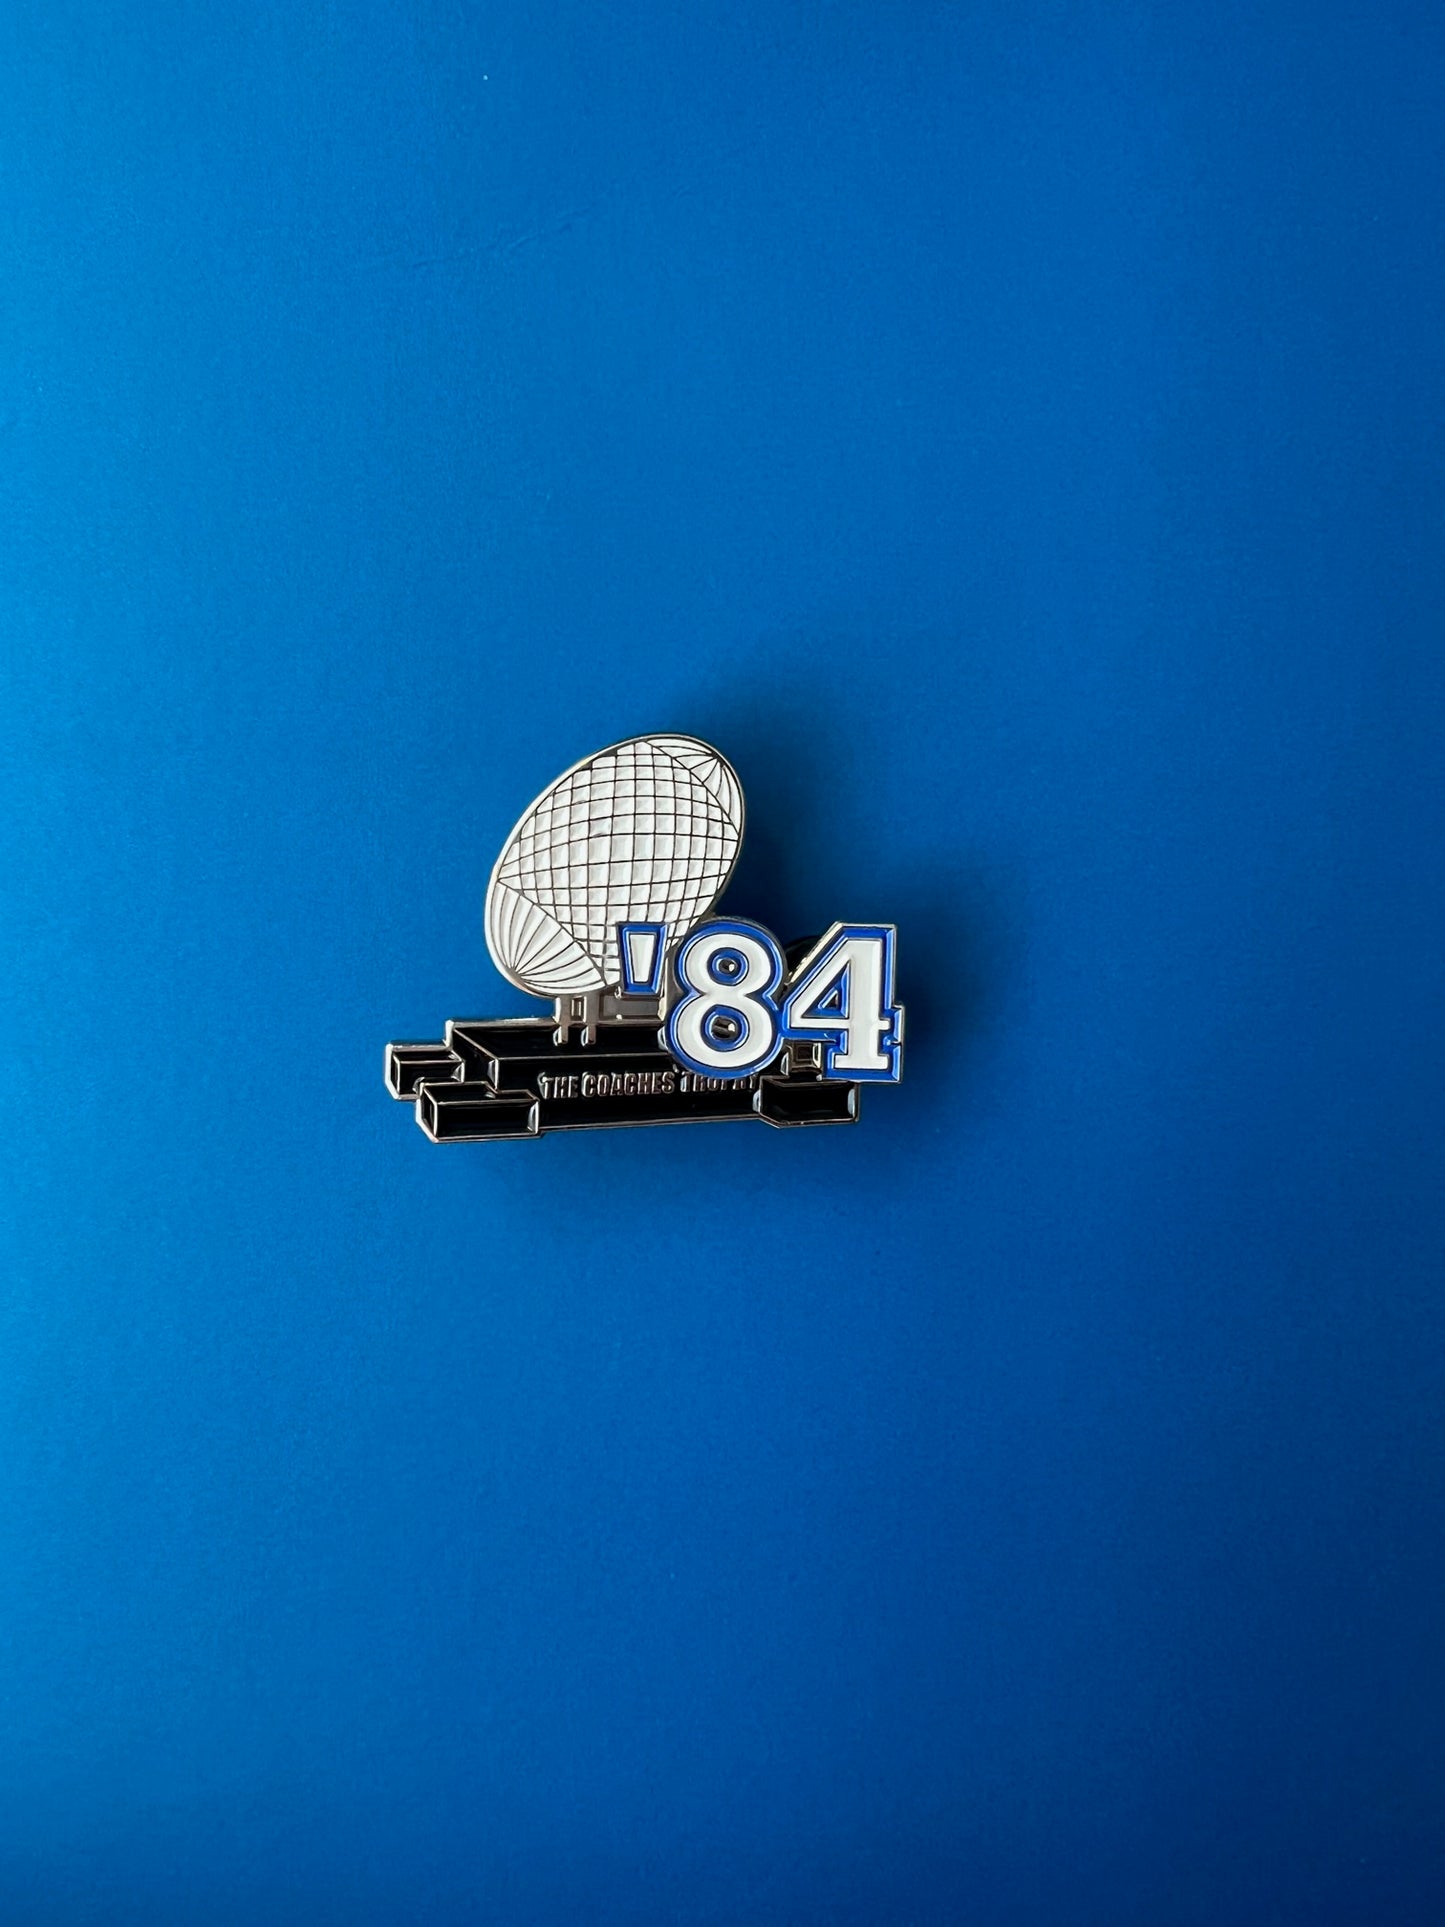 The '84 Trophy Pin